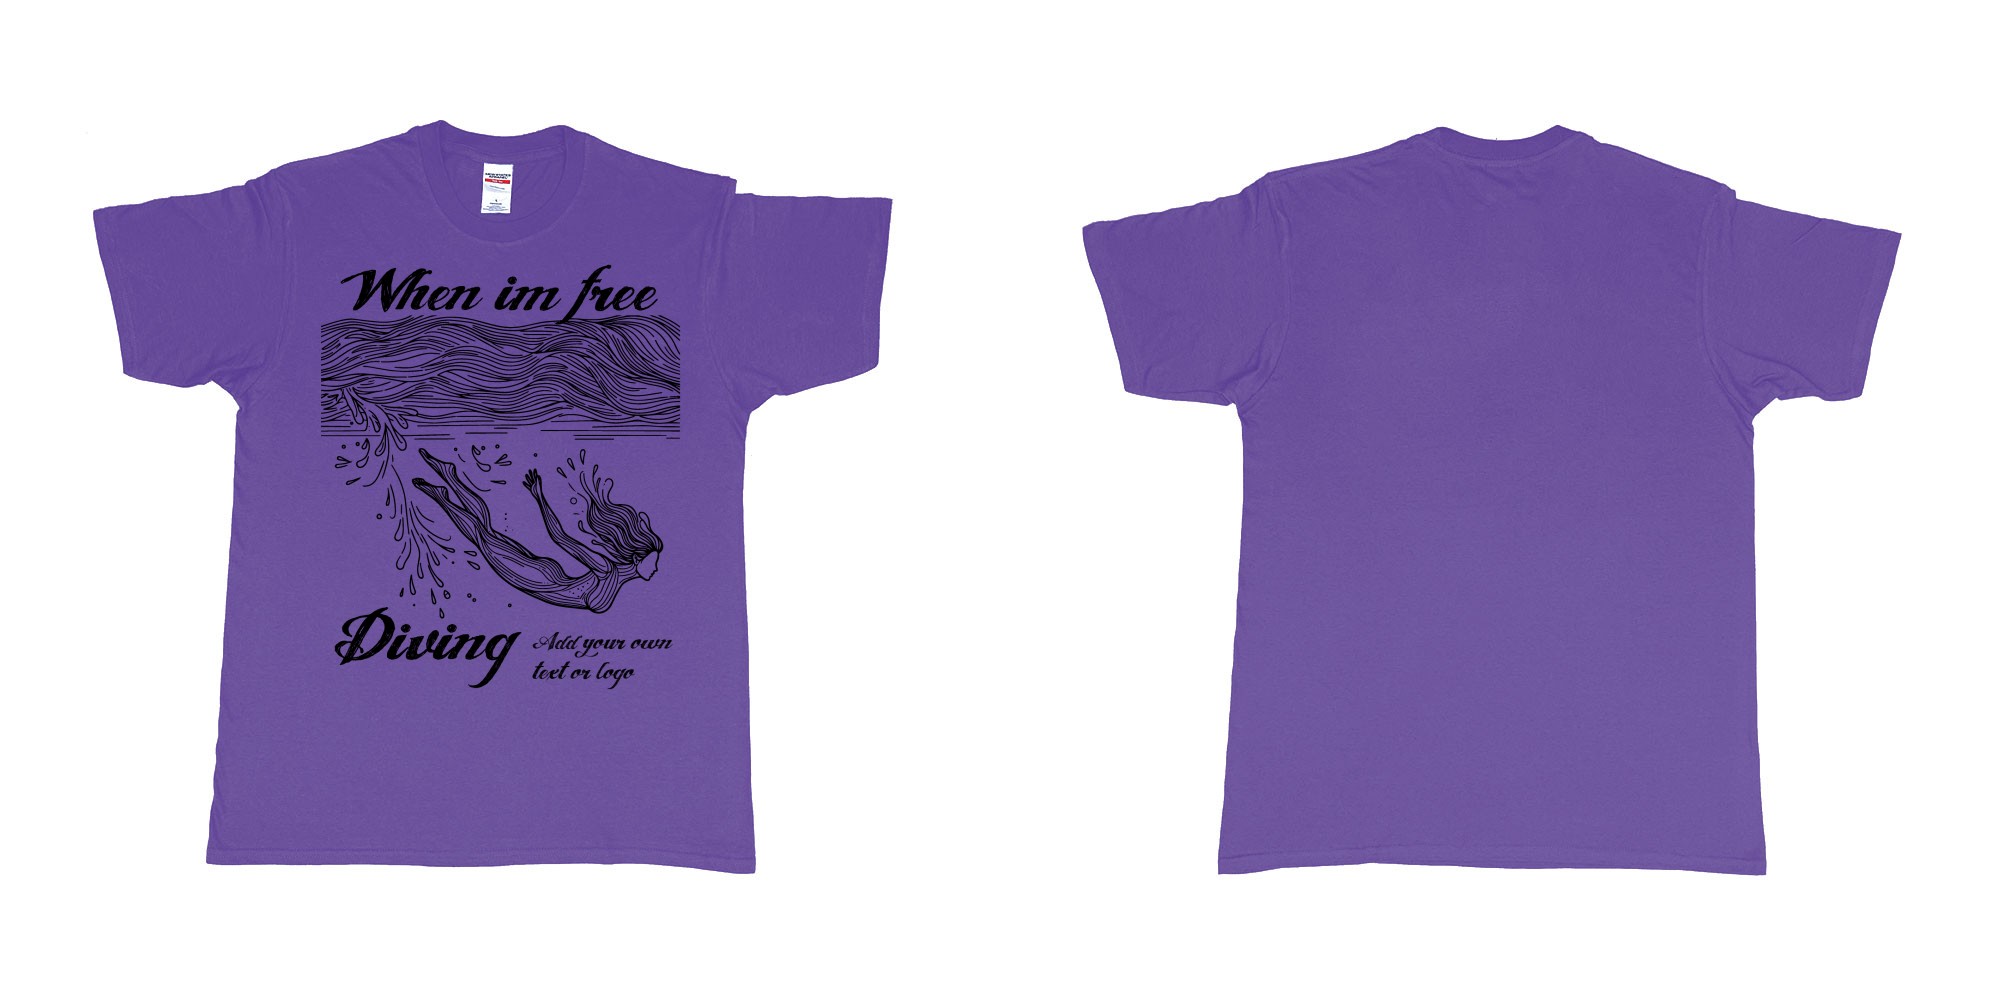 Custom tshirt design when im free diving add own text or logo in fabric color purple choice your own text made in Bali by The Pirate Way